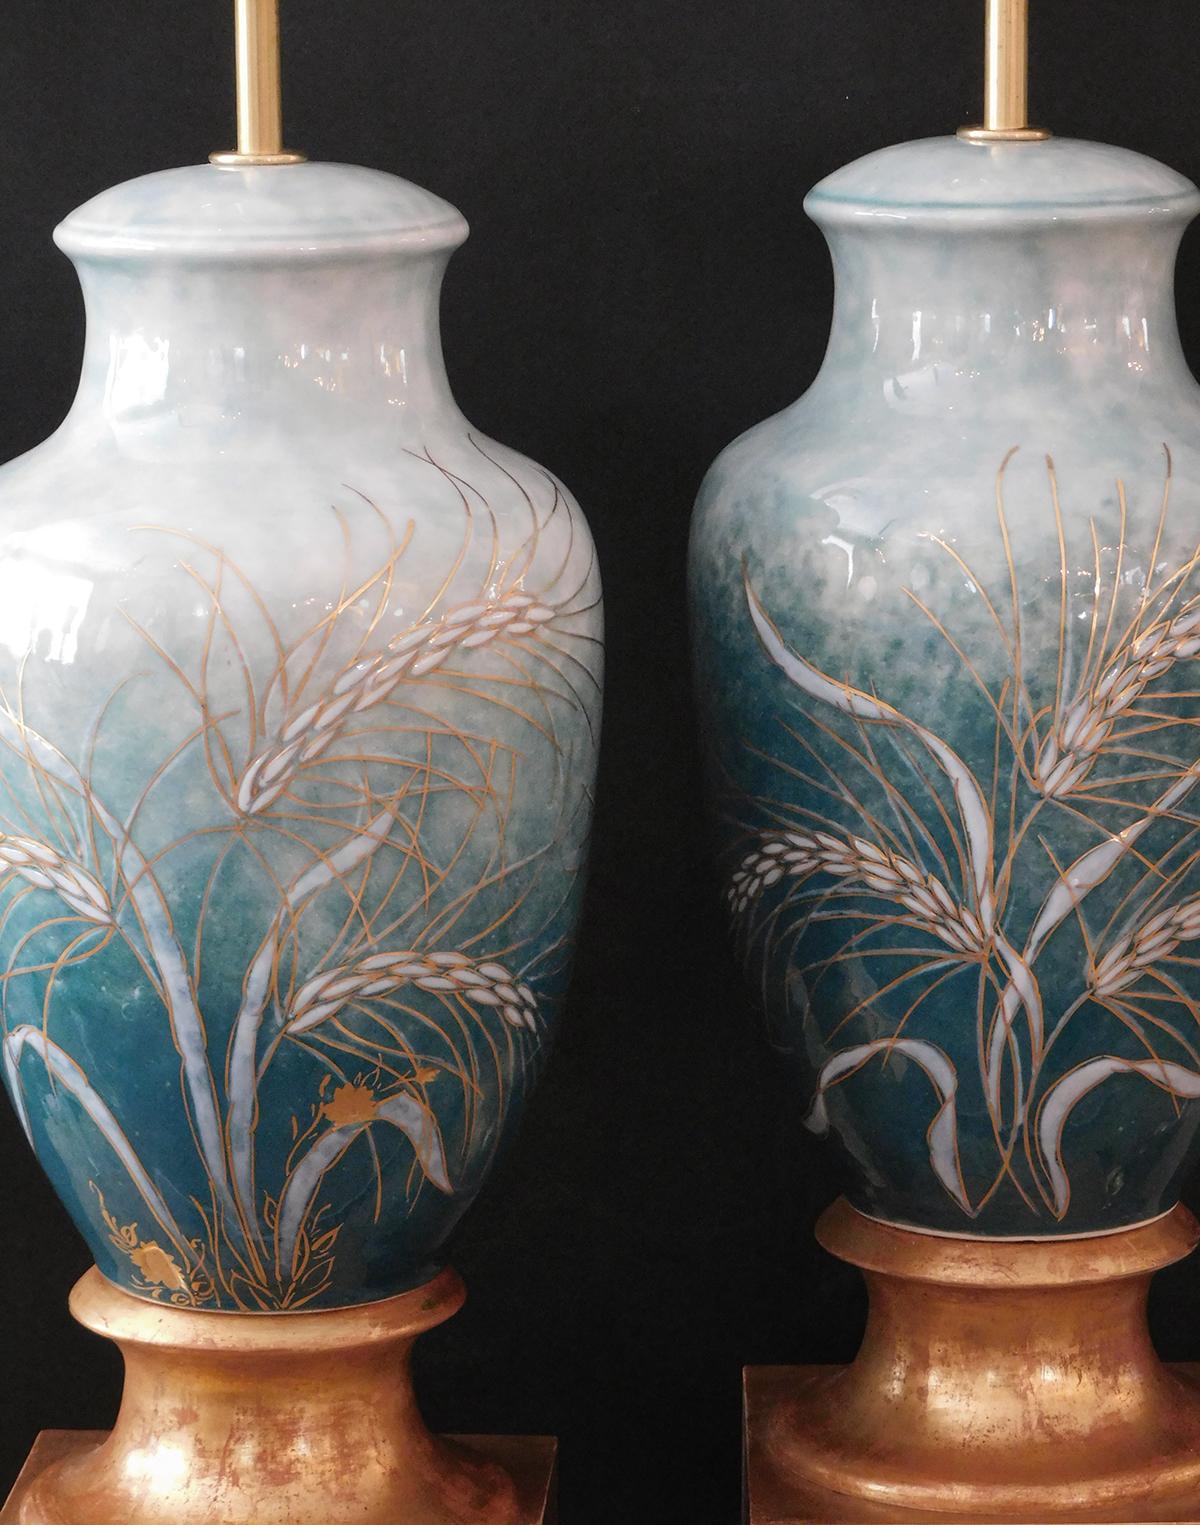 Pair Signed Camille Tharaud '1878-1956' Enameled Porcelain Lamps, Limoges In Good Condition For Sale In San Francisco, CA